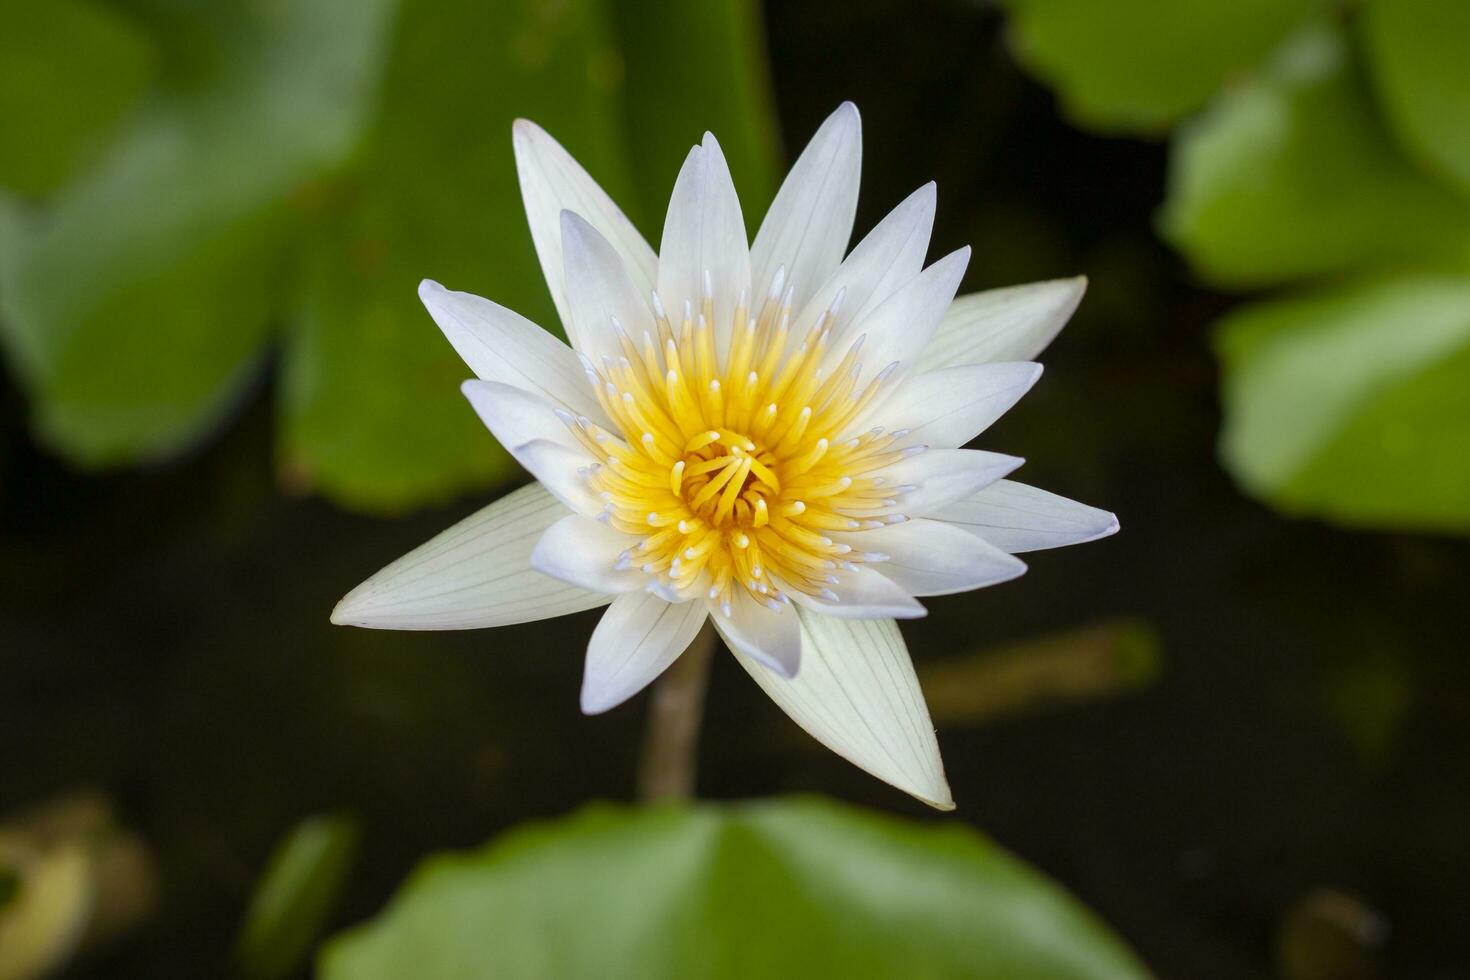 White lotus or water lily flower blooming in the pond on blur nature background. photo